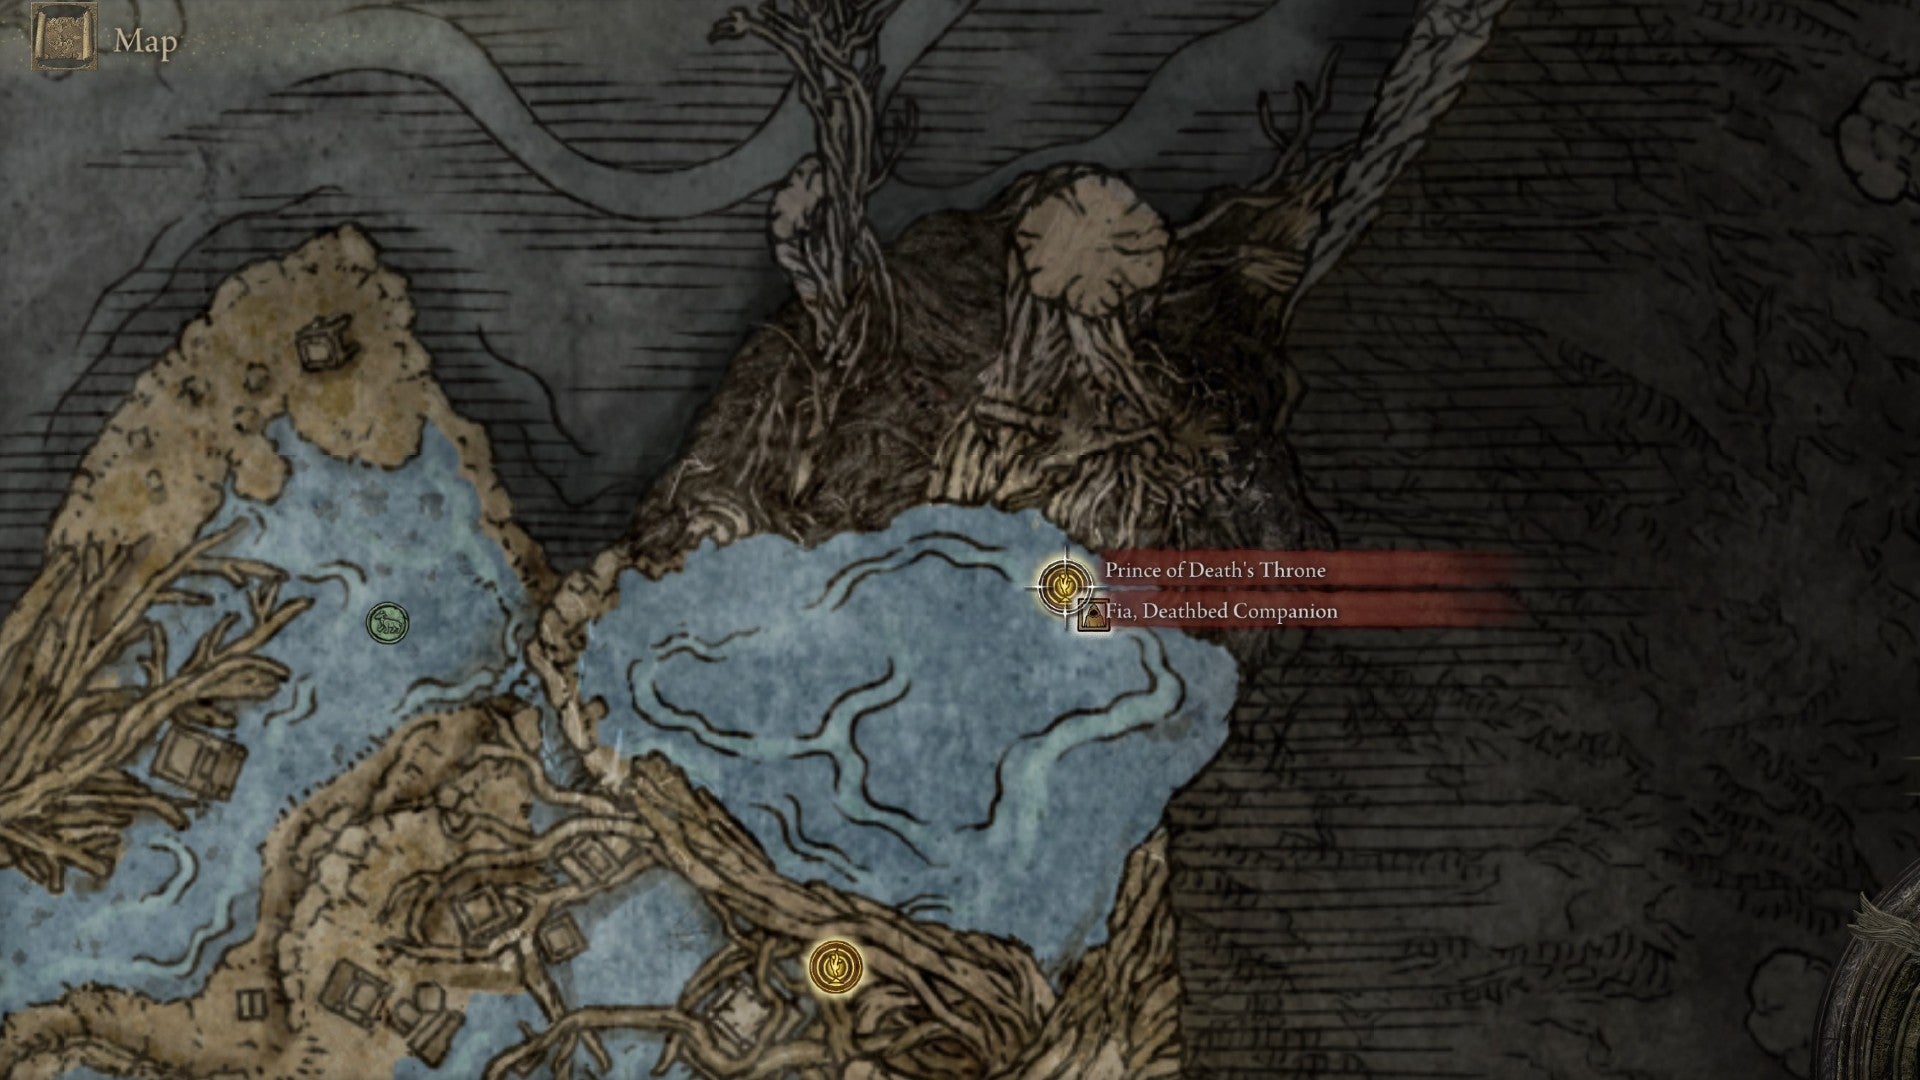 Elden Ring screenshot showing the Inseparable Sword location at the Prince of Death's Throne